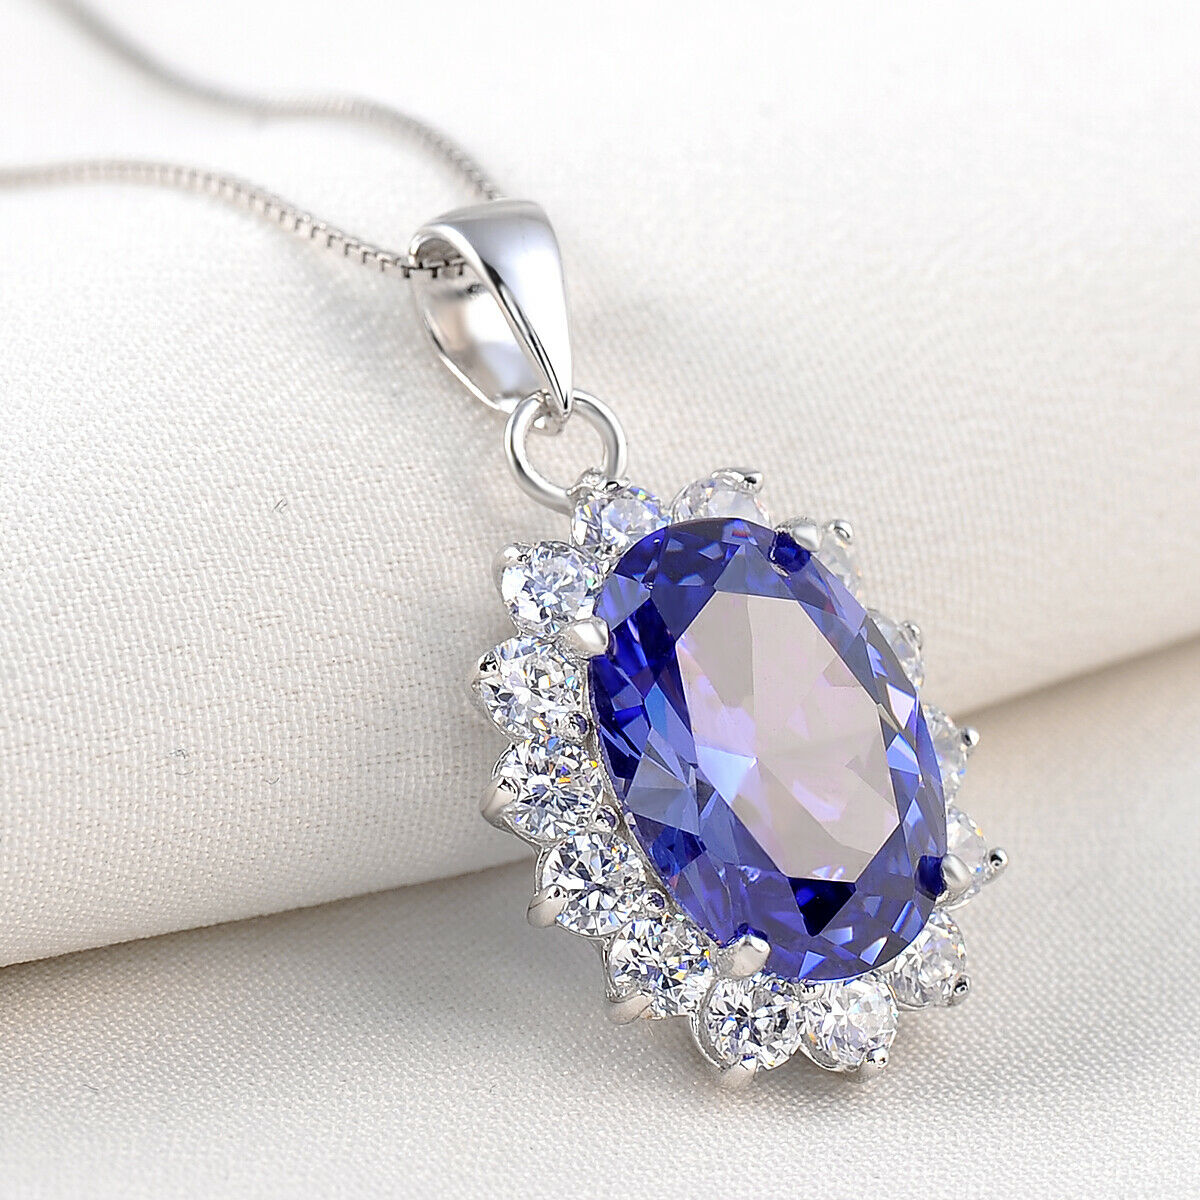 6.4ct Oval Blue Tanzanite Aaaa Cz 925 Sterling Silver Pendant 18" Chain Necklace